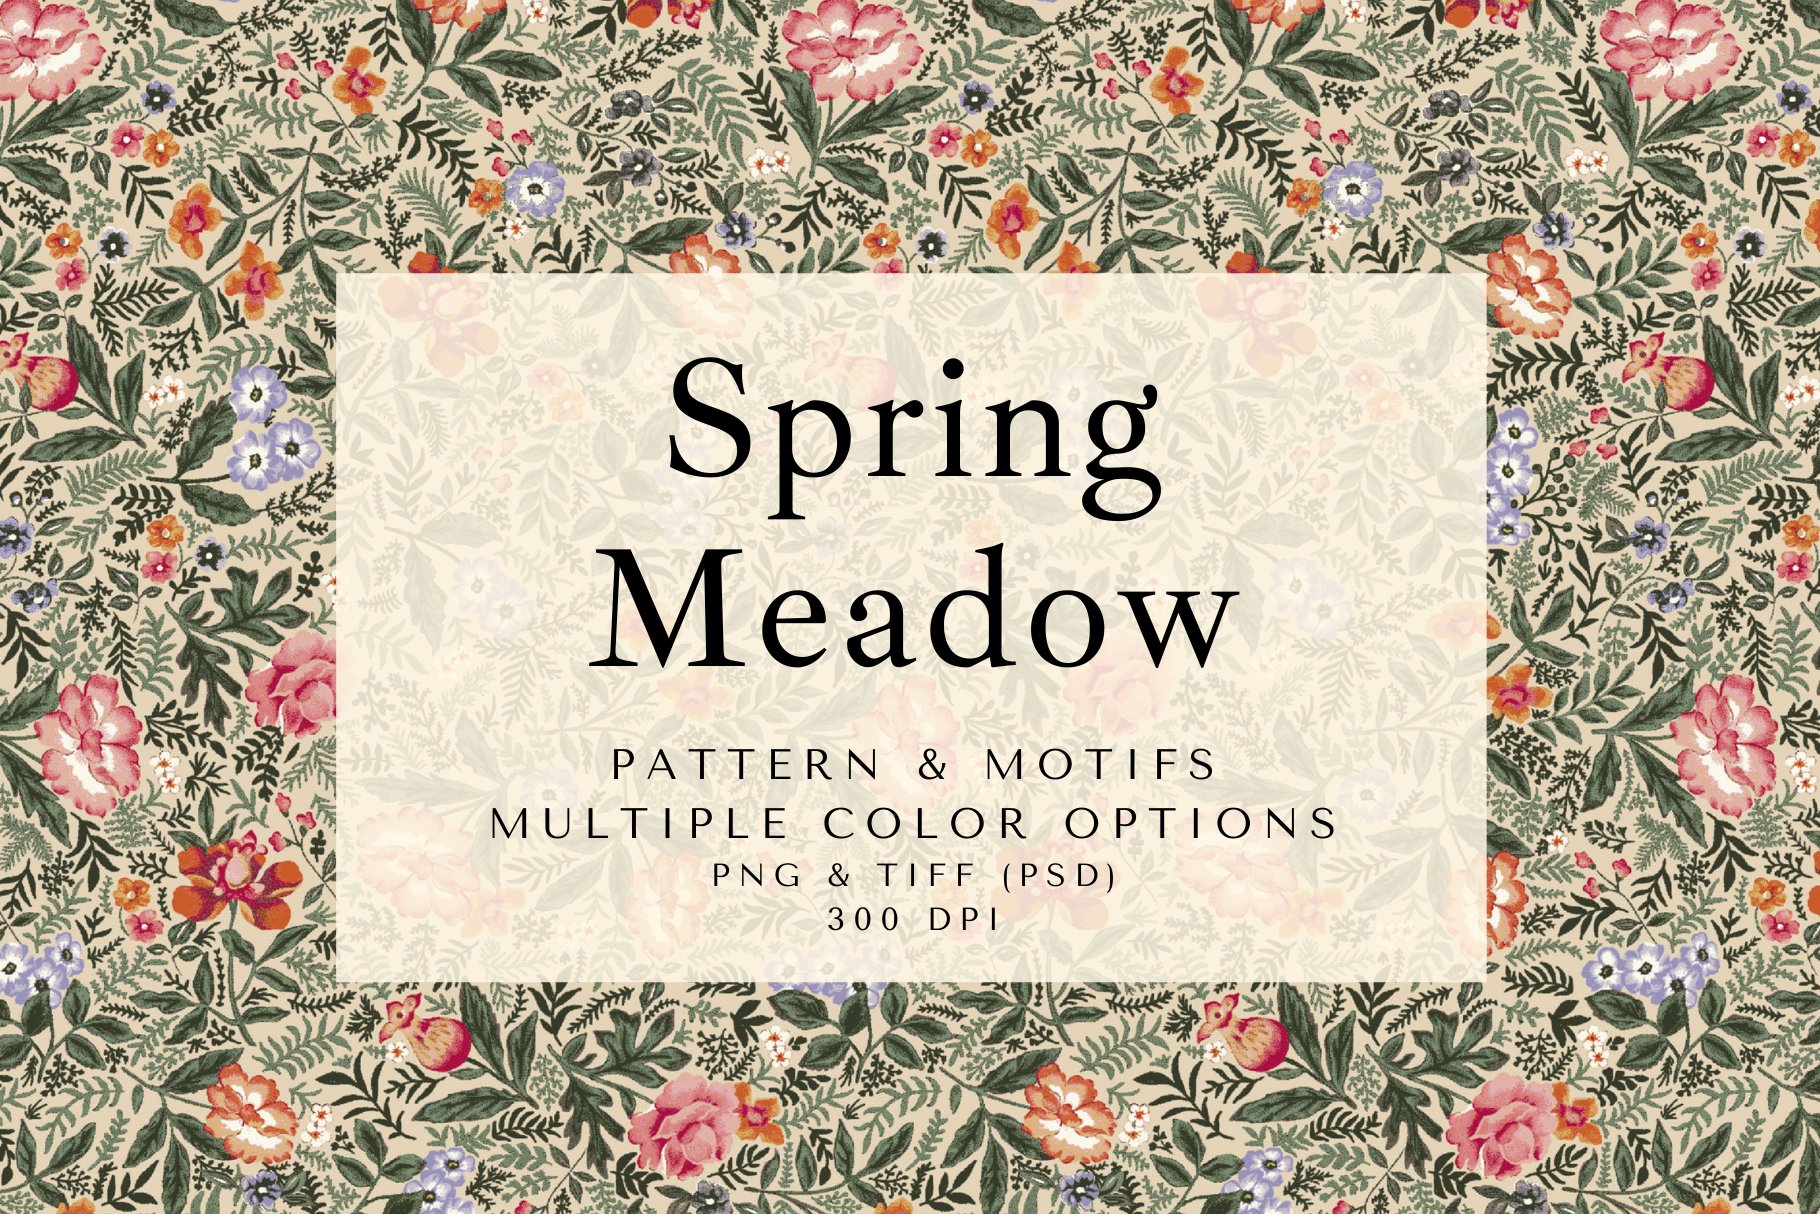 Spring Meadow, Pattern and Motifs! cover image.